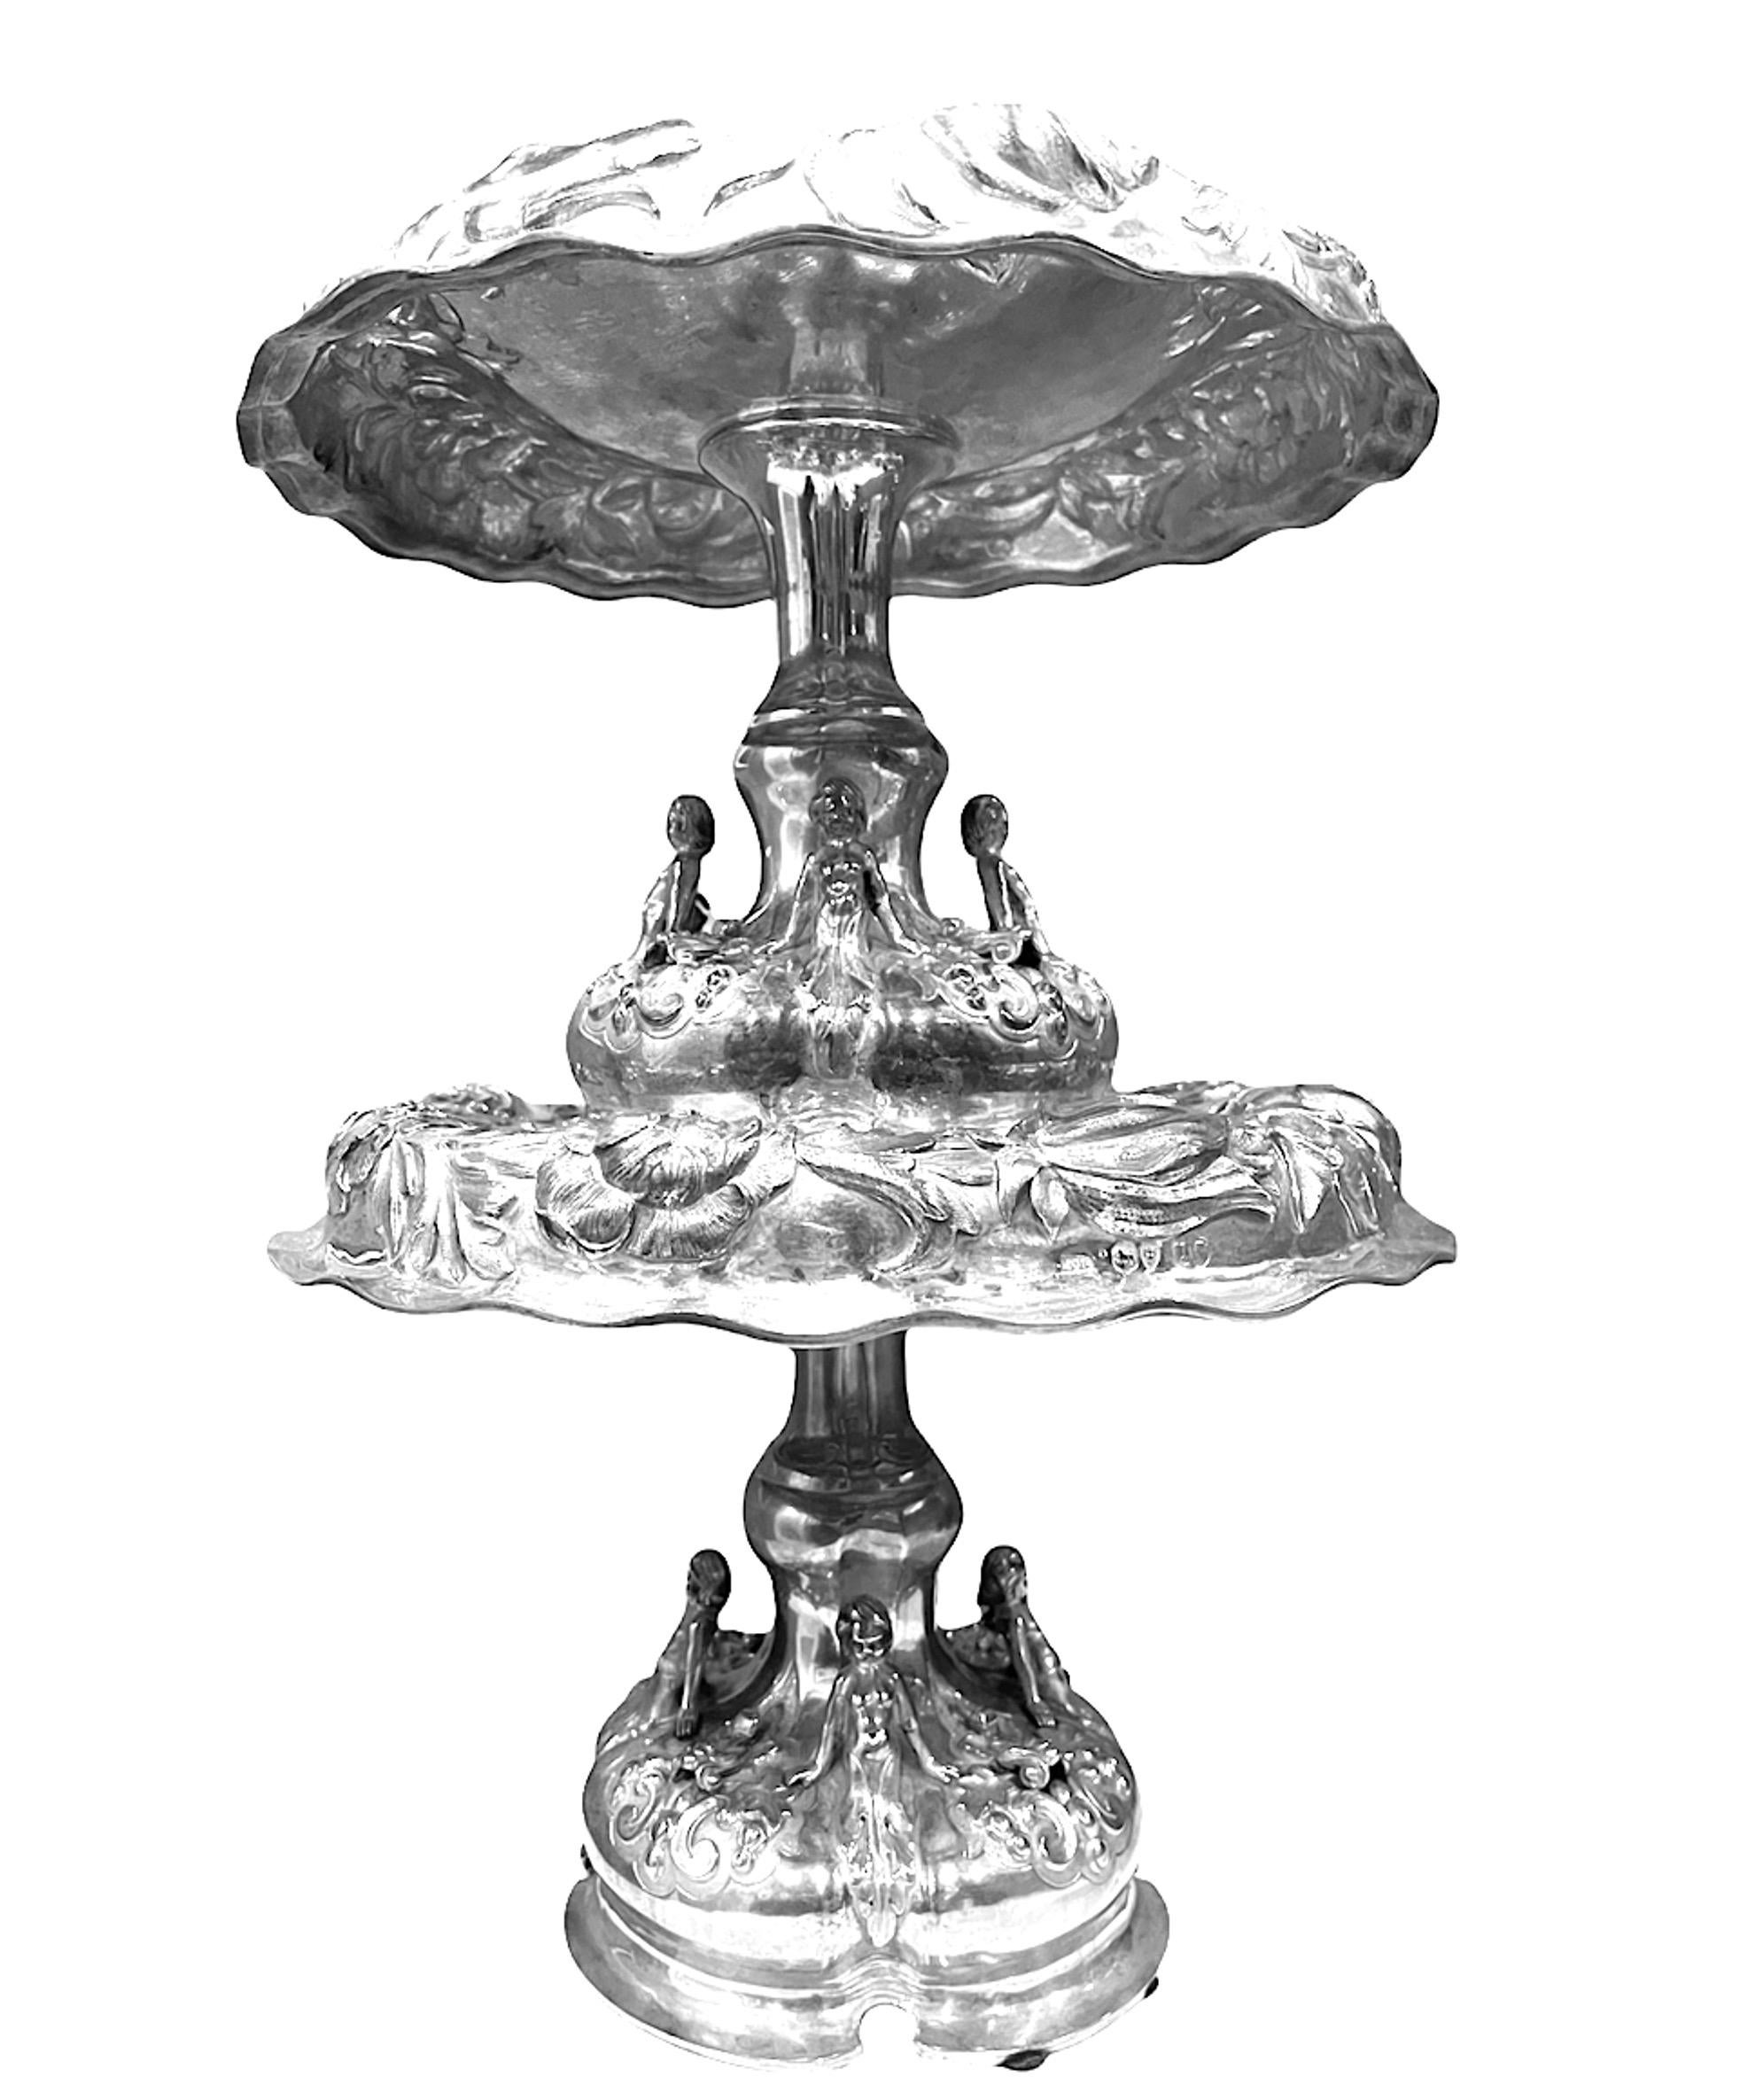 A pair of English 19th century (1875) Victorian silver tazze by Alexander MacRae. These are boldly chased with flowers and foliage, the bases applied with demi-figures and a shield engraved with arms. Both pieces are marked by the artist including